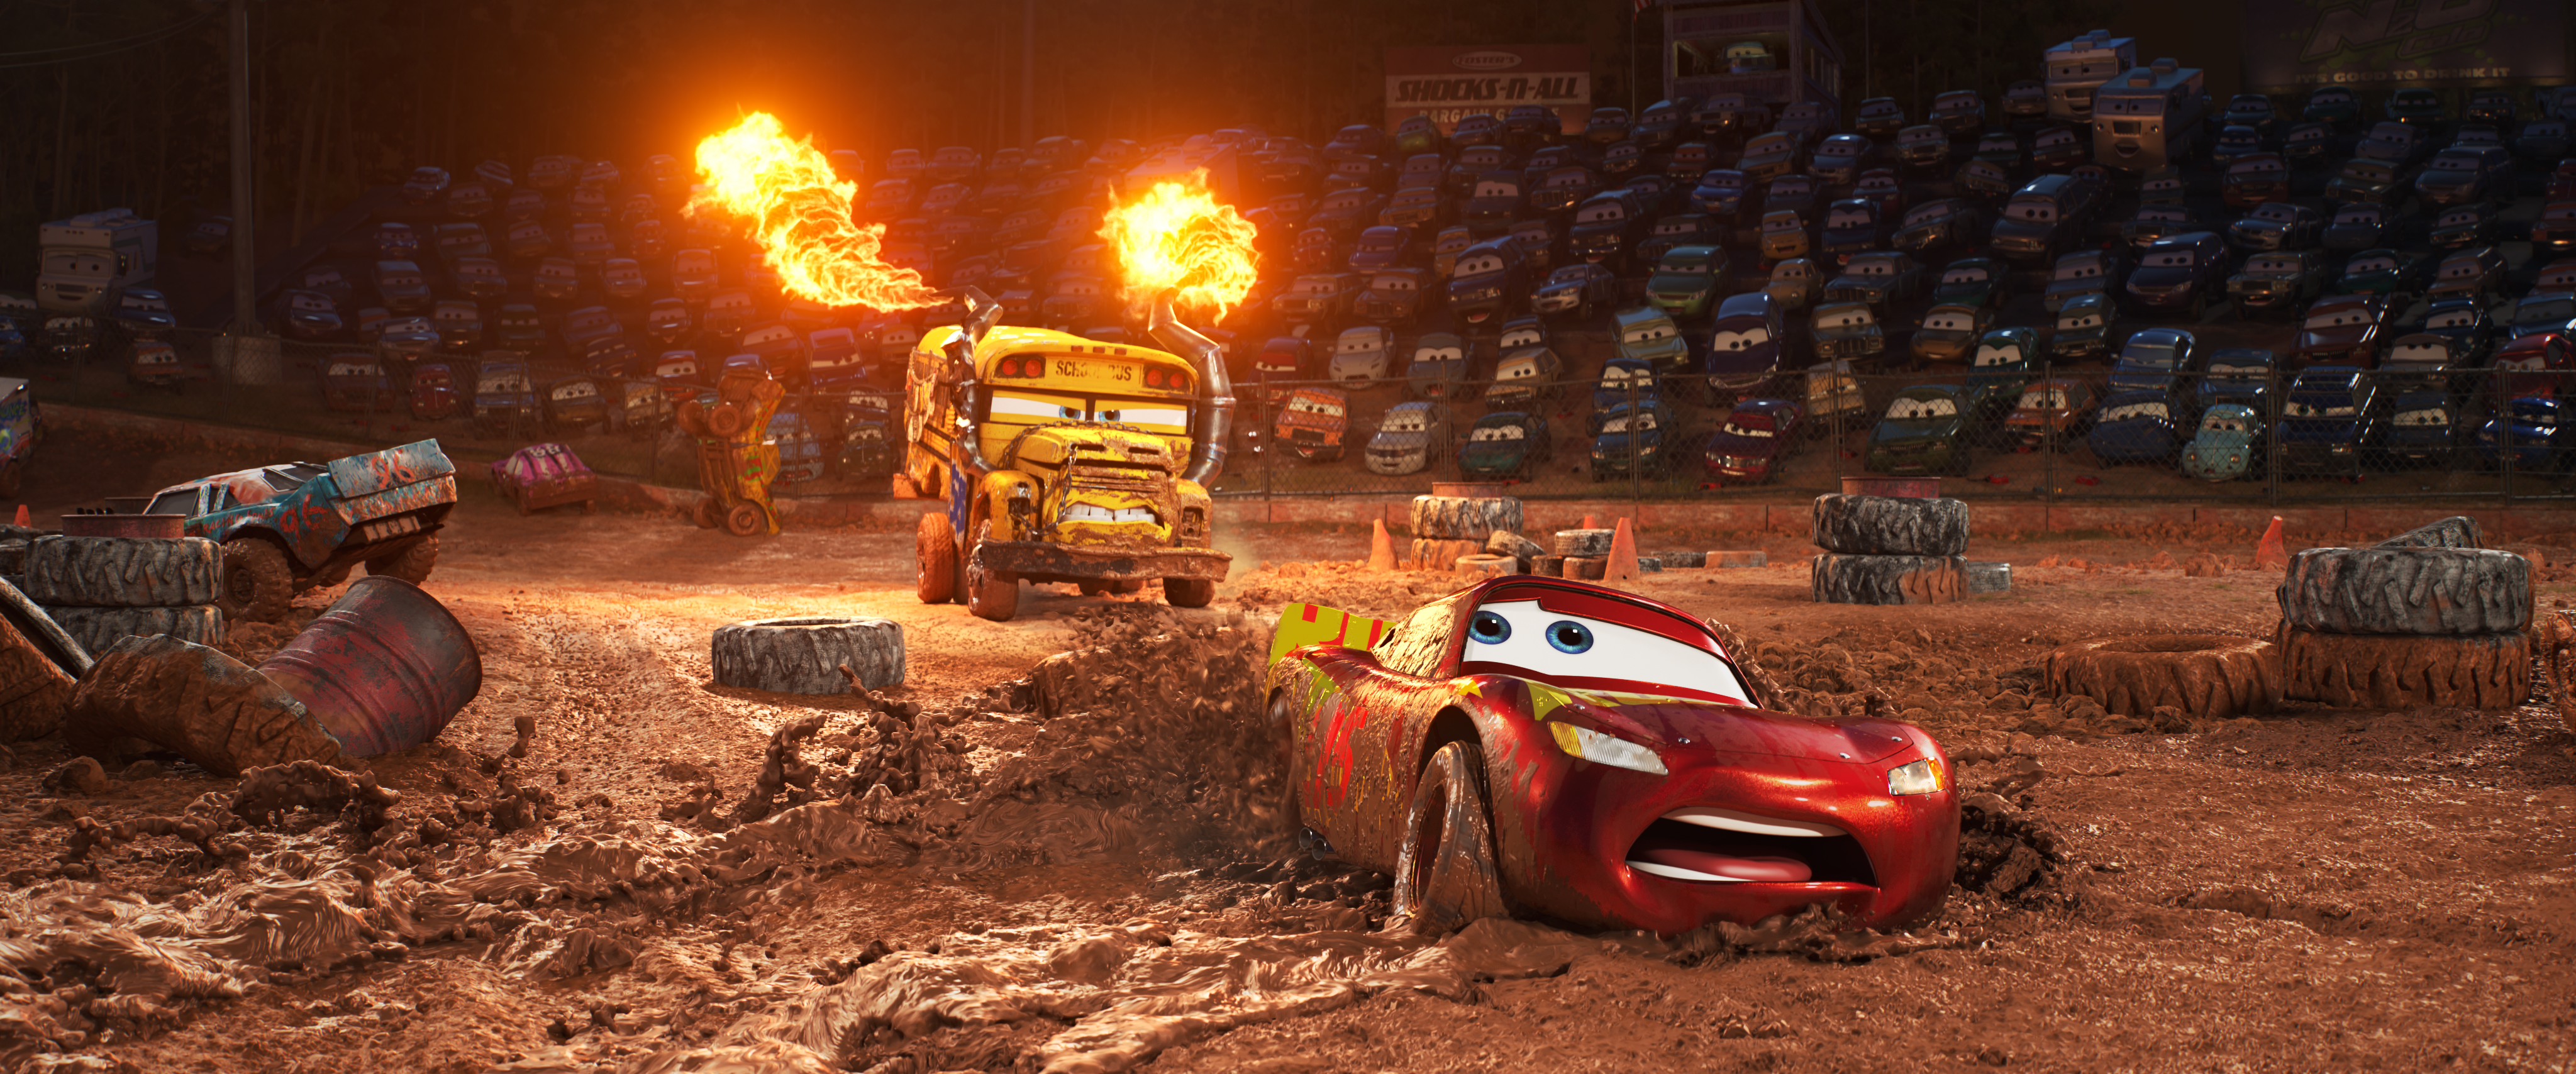 Chatting with the Cast of Cars 3